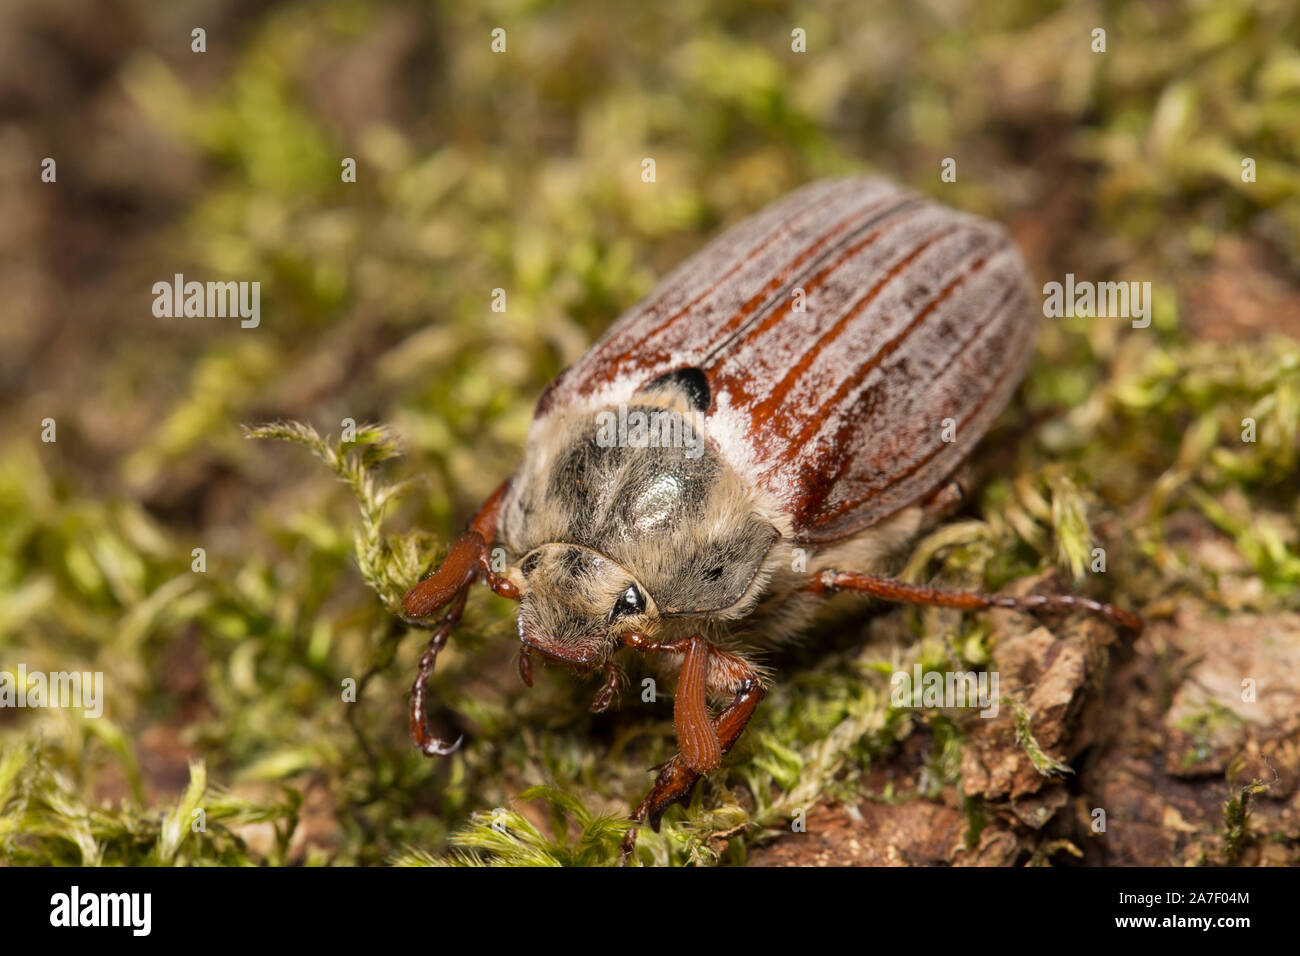 A Cockchafer beetle, or May bug, Melolontha melolontha, photographed next to a garden pond in North west England UK GB. Stock Photo